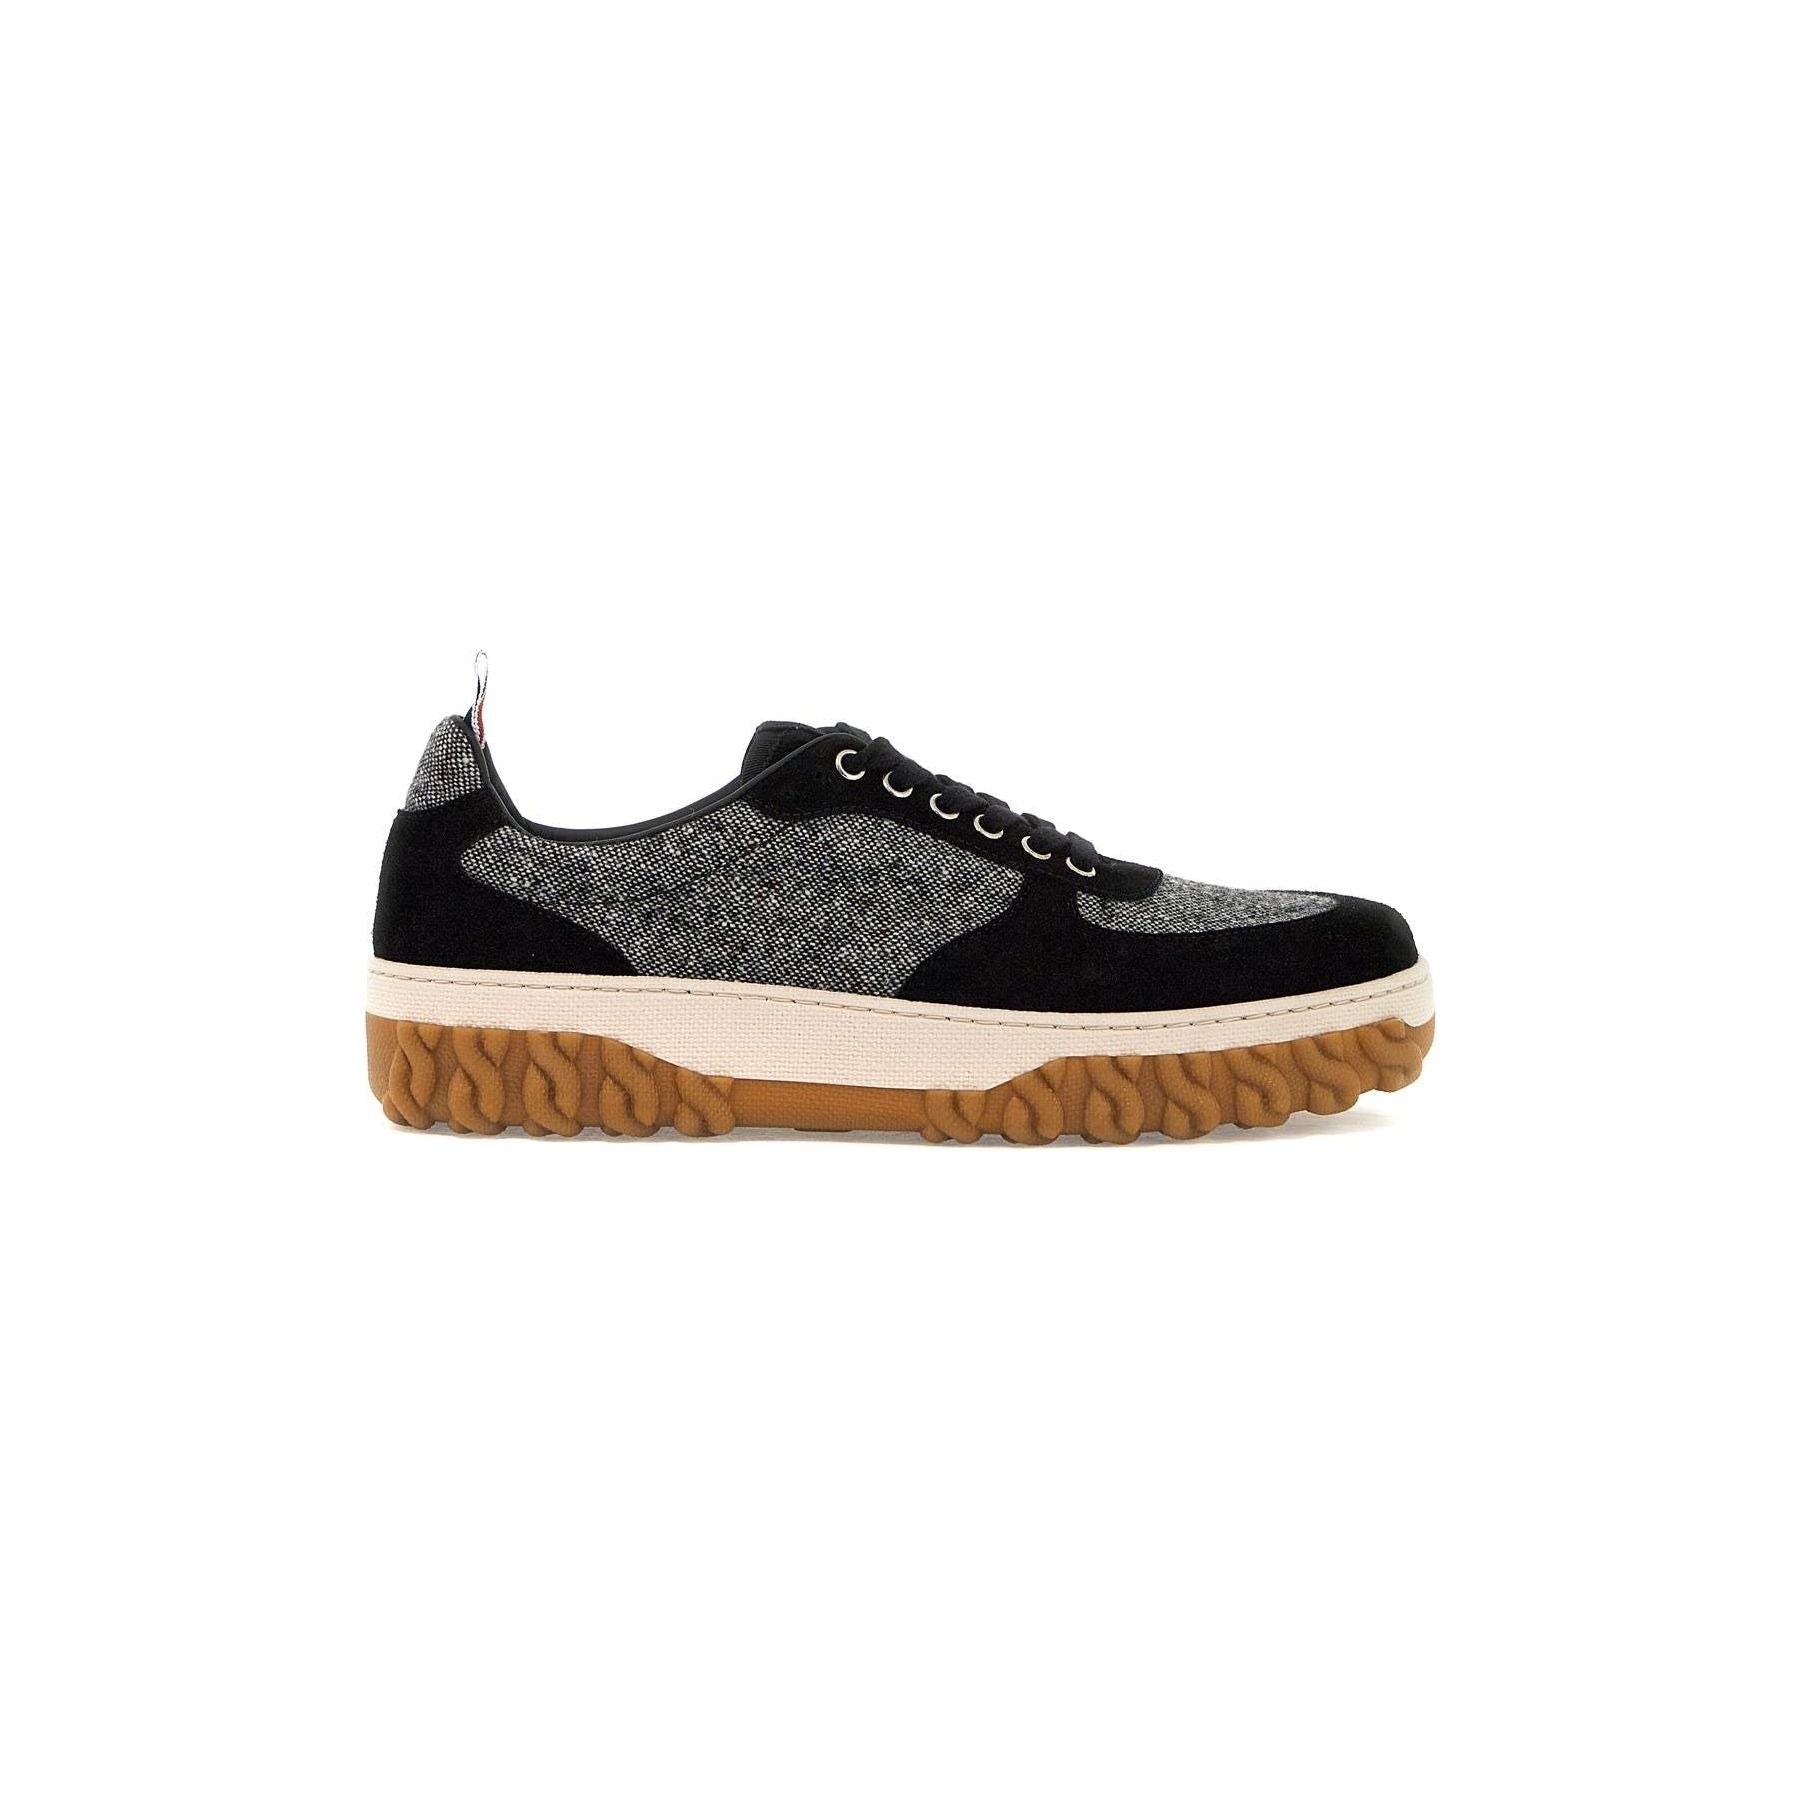 Donegal Tweed Cable Knit Sole Letterman Sneakers